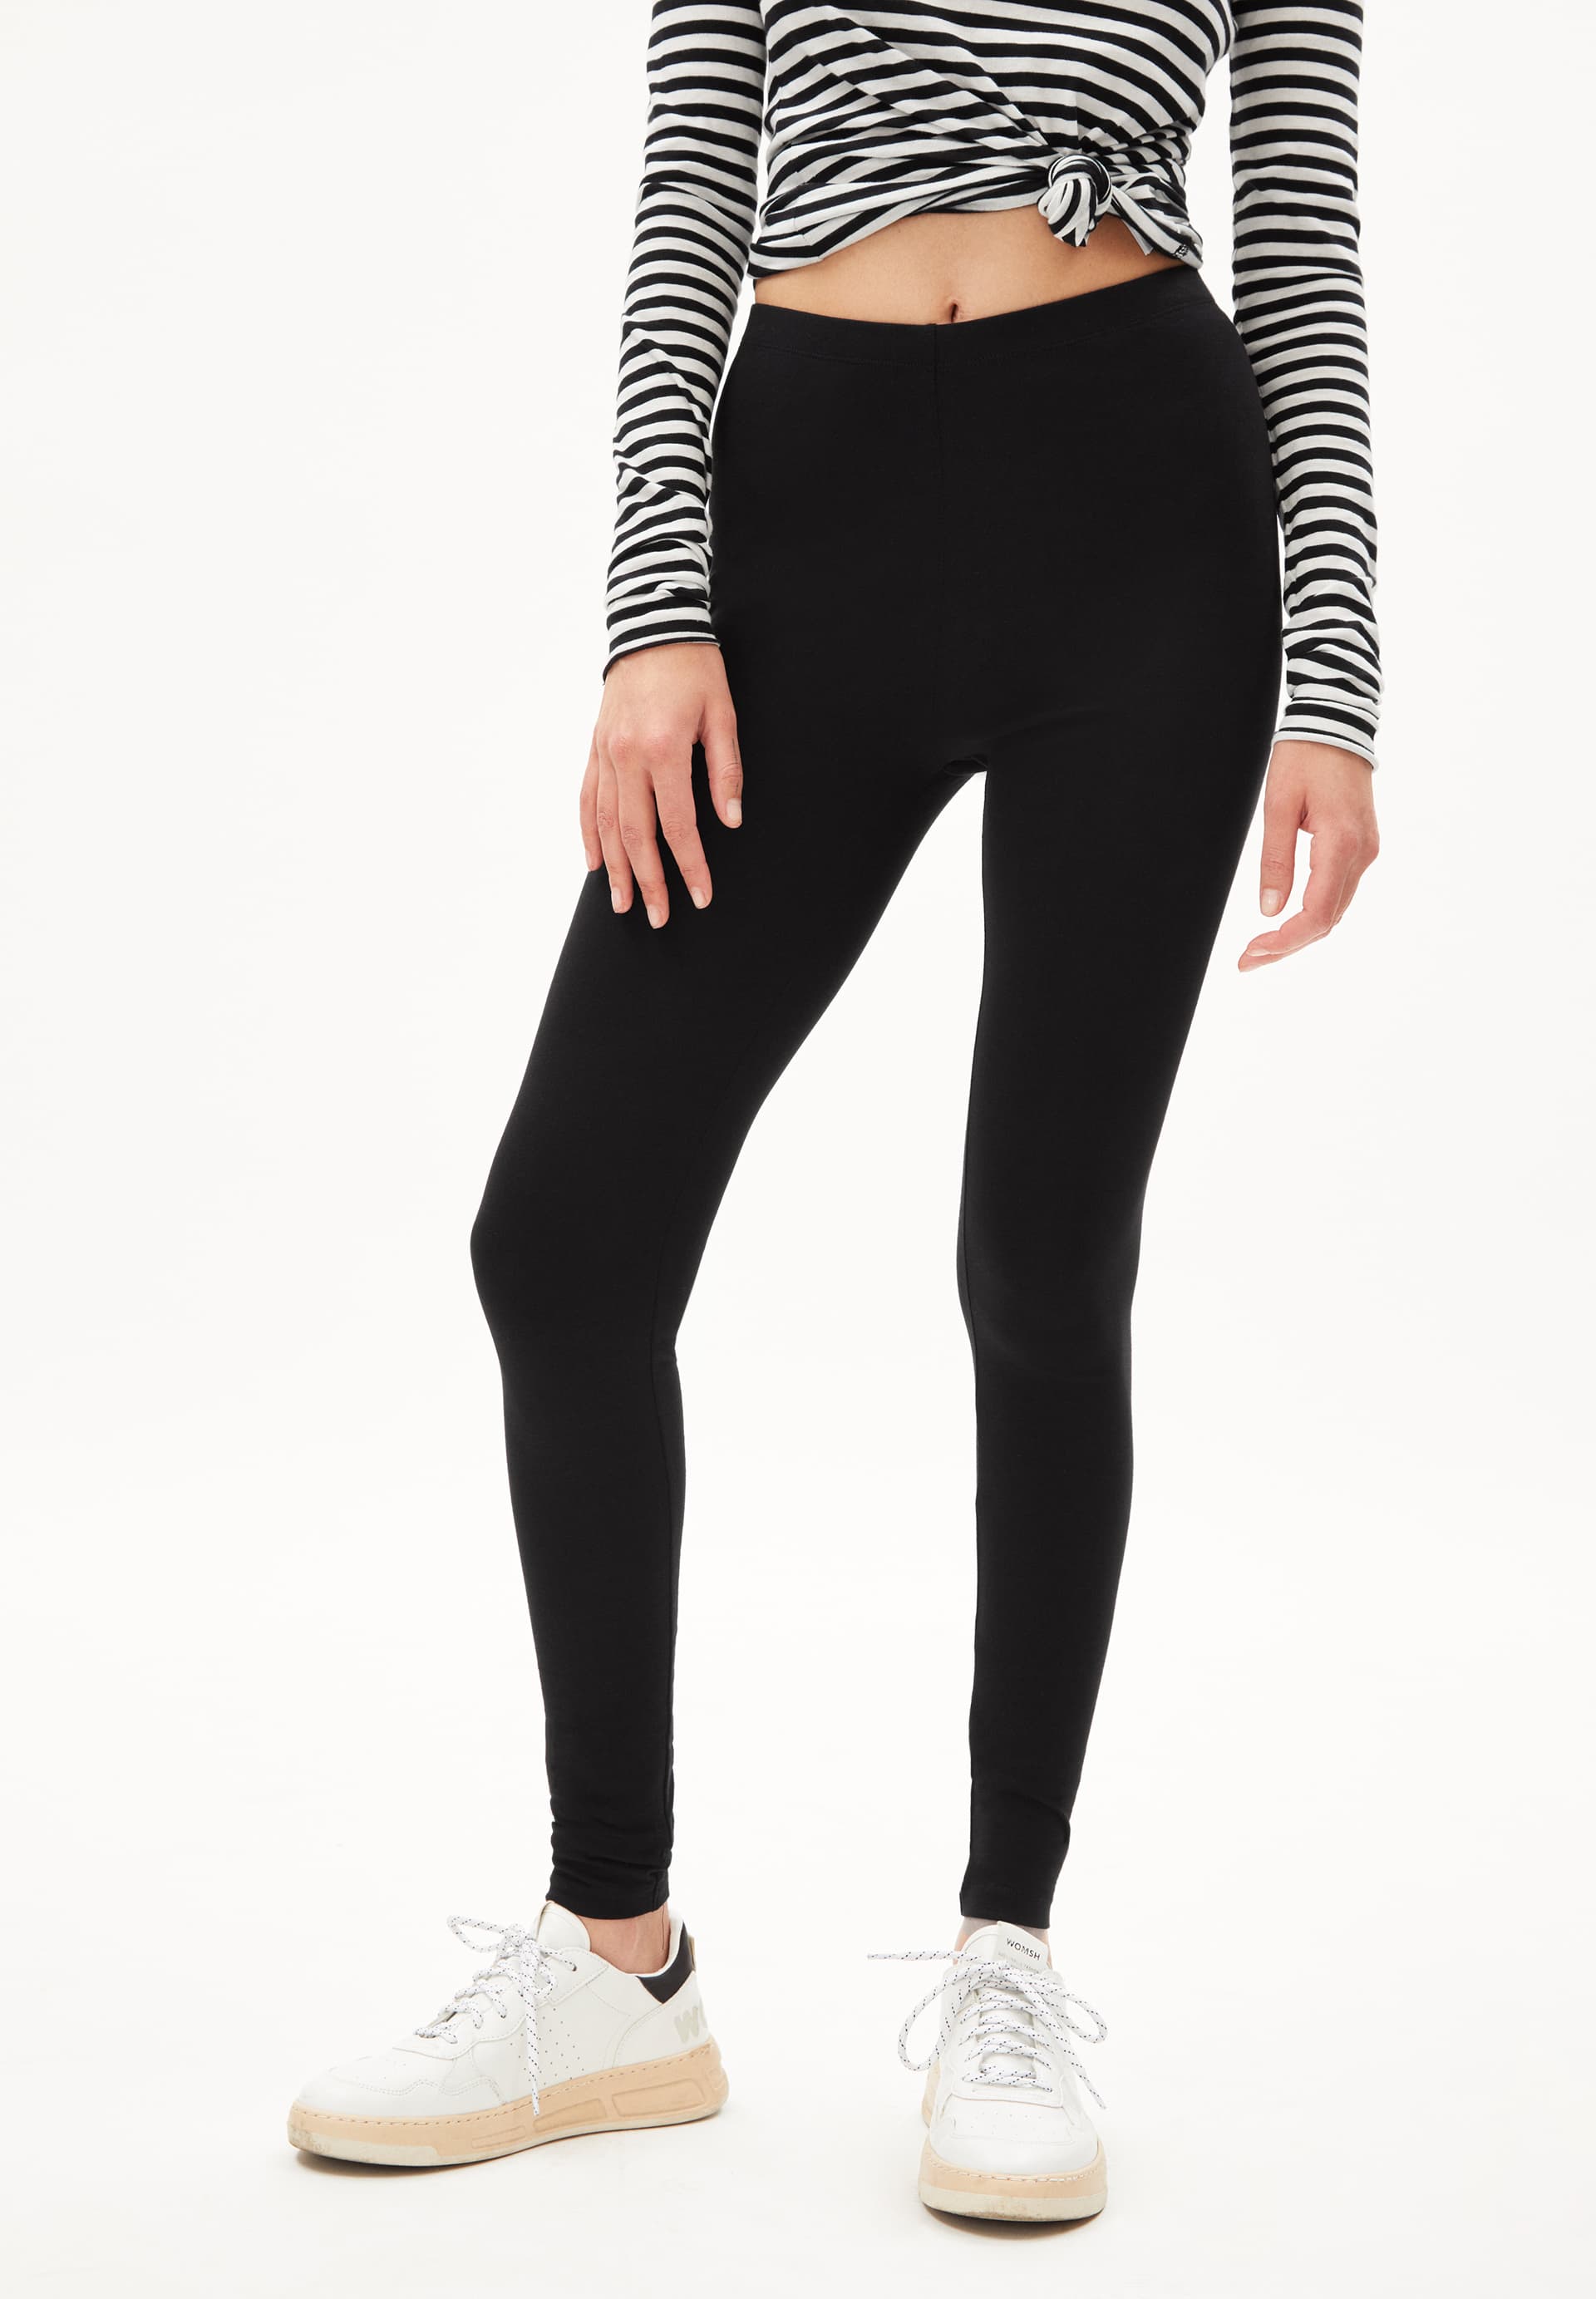 Topshop full length heavy weight legging with deep waistband in